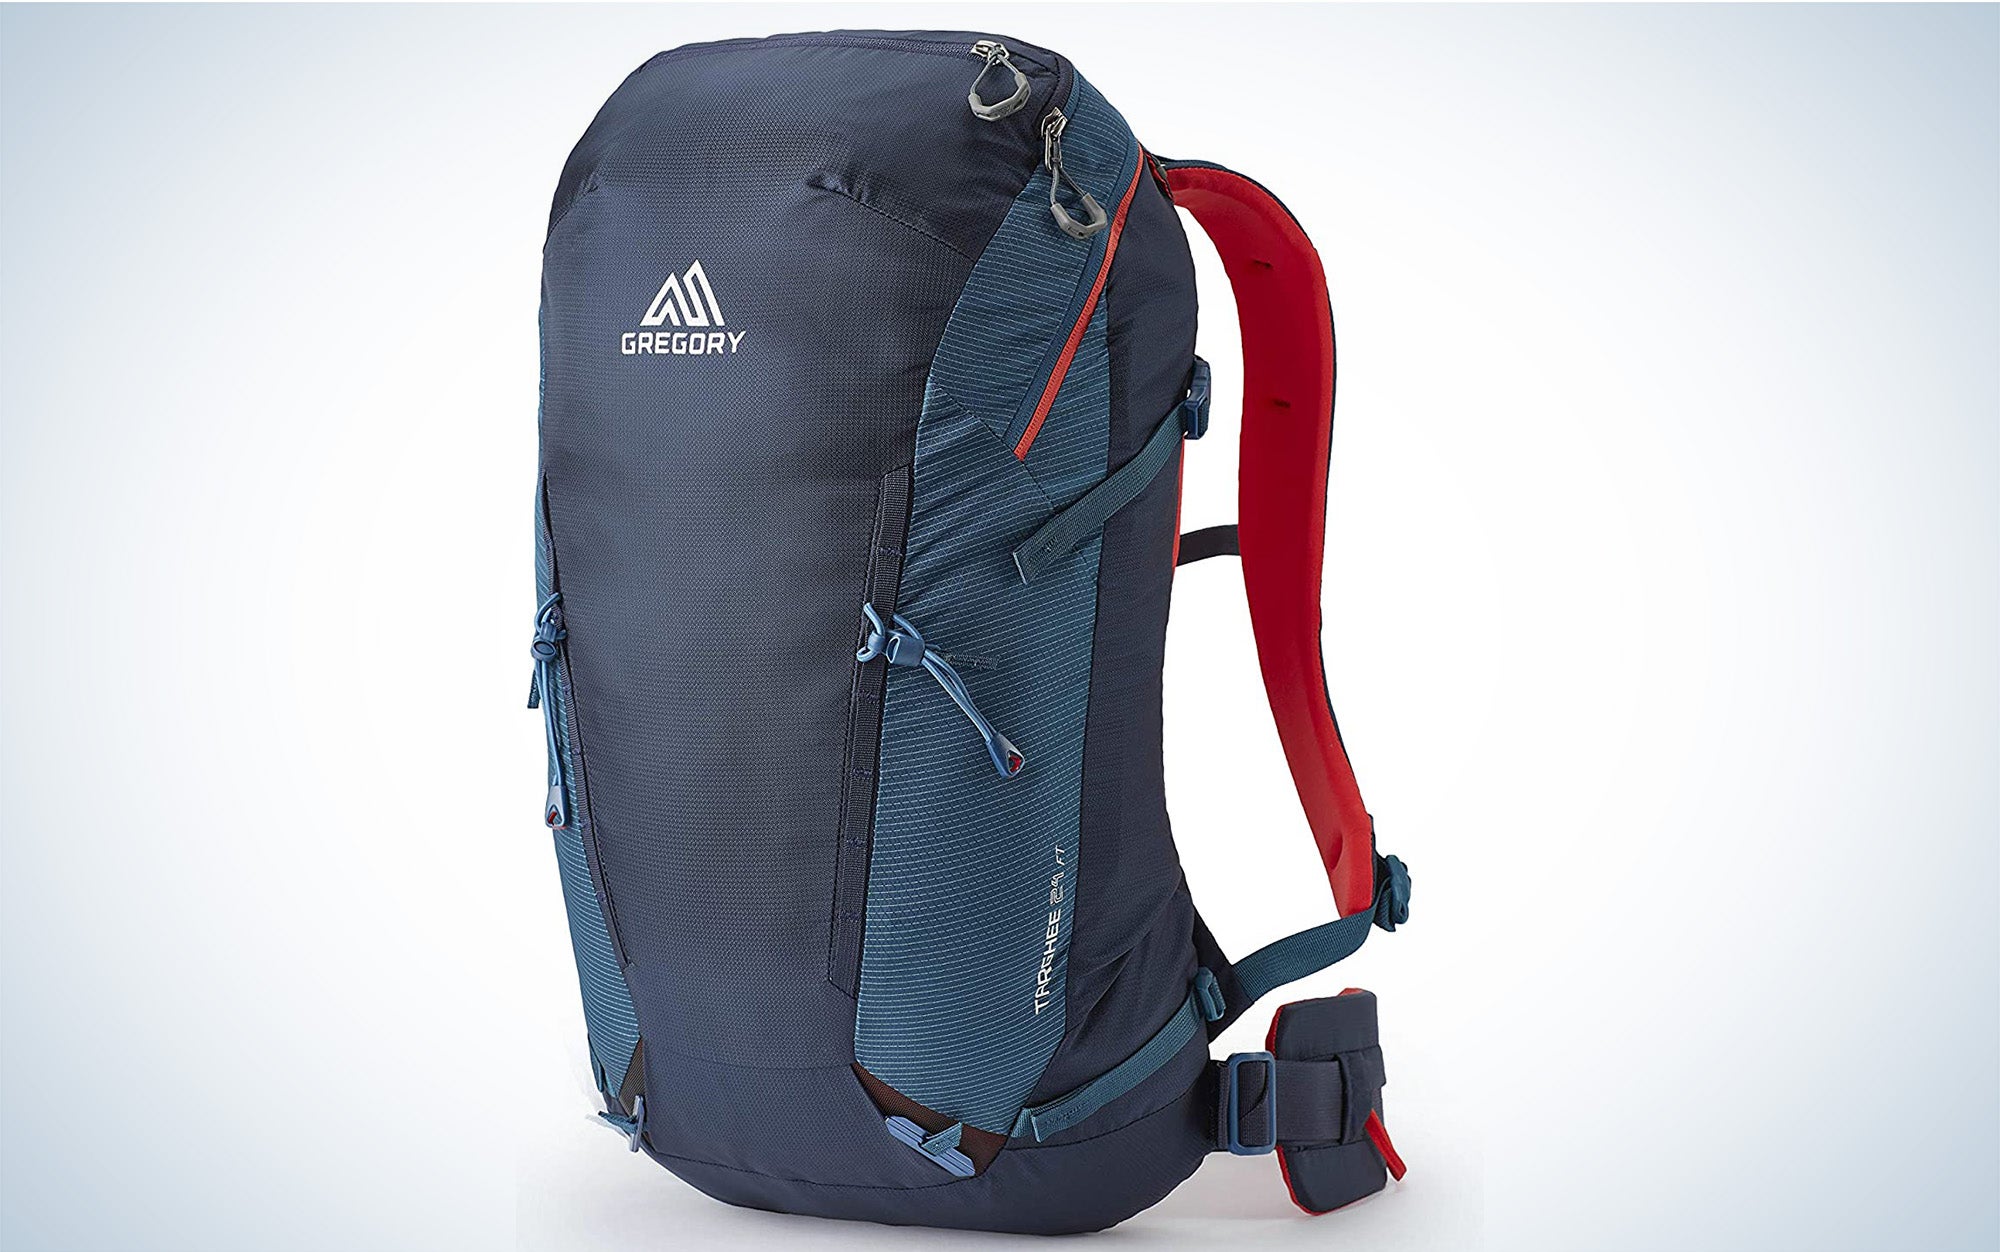 The Gregory Targhee FastTrack 24L is the best for skiers.